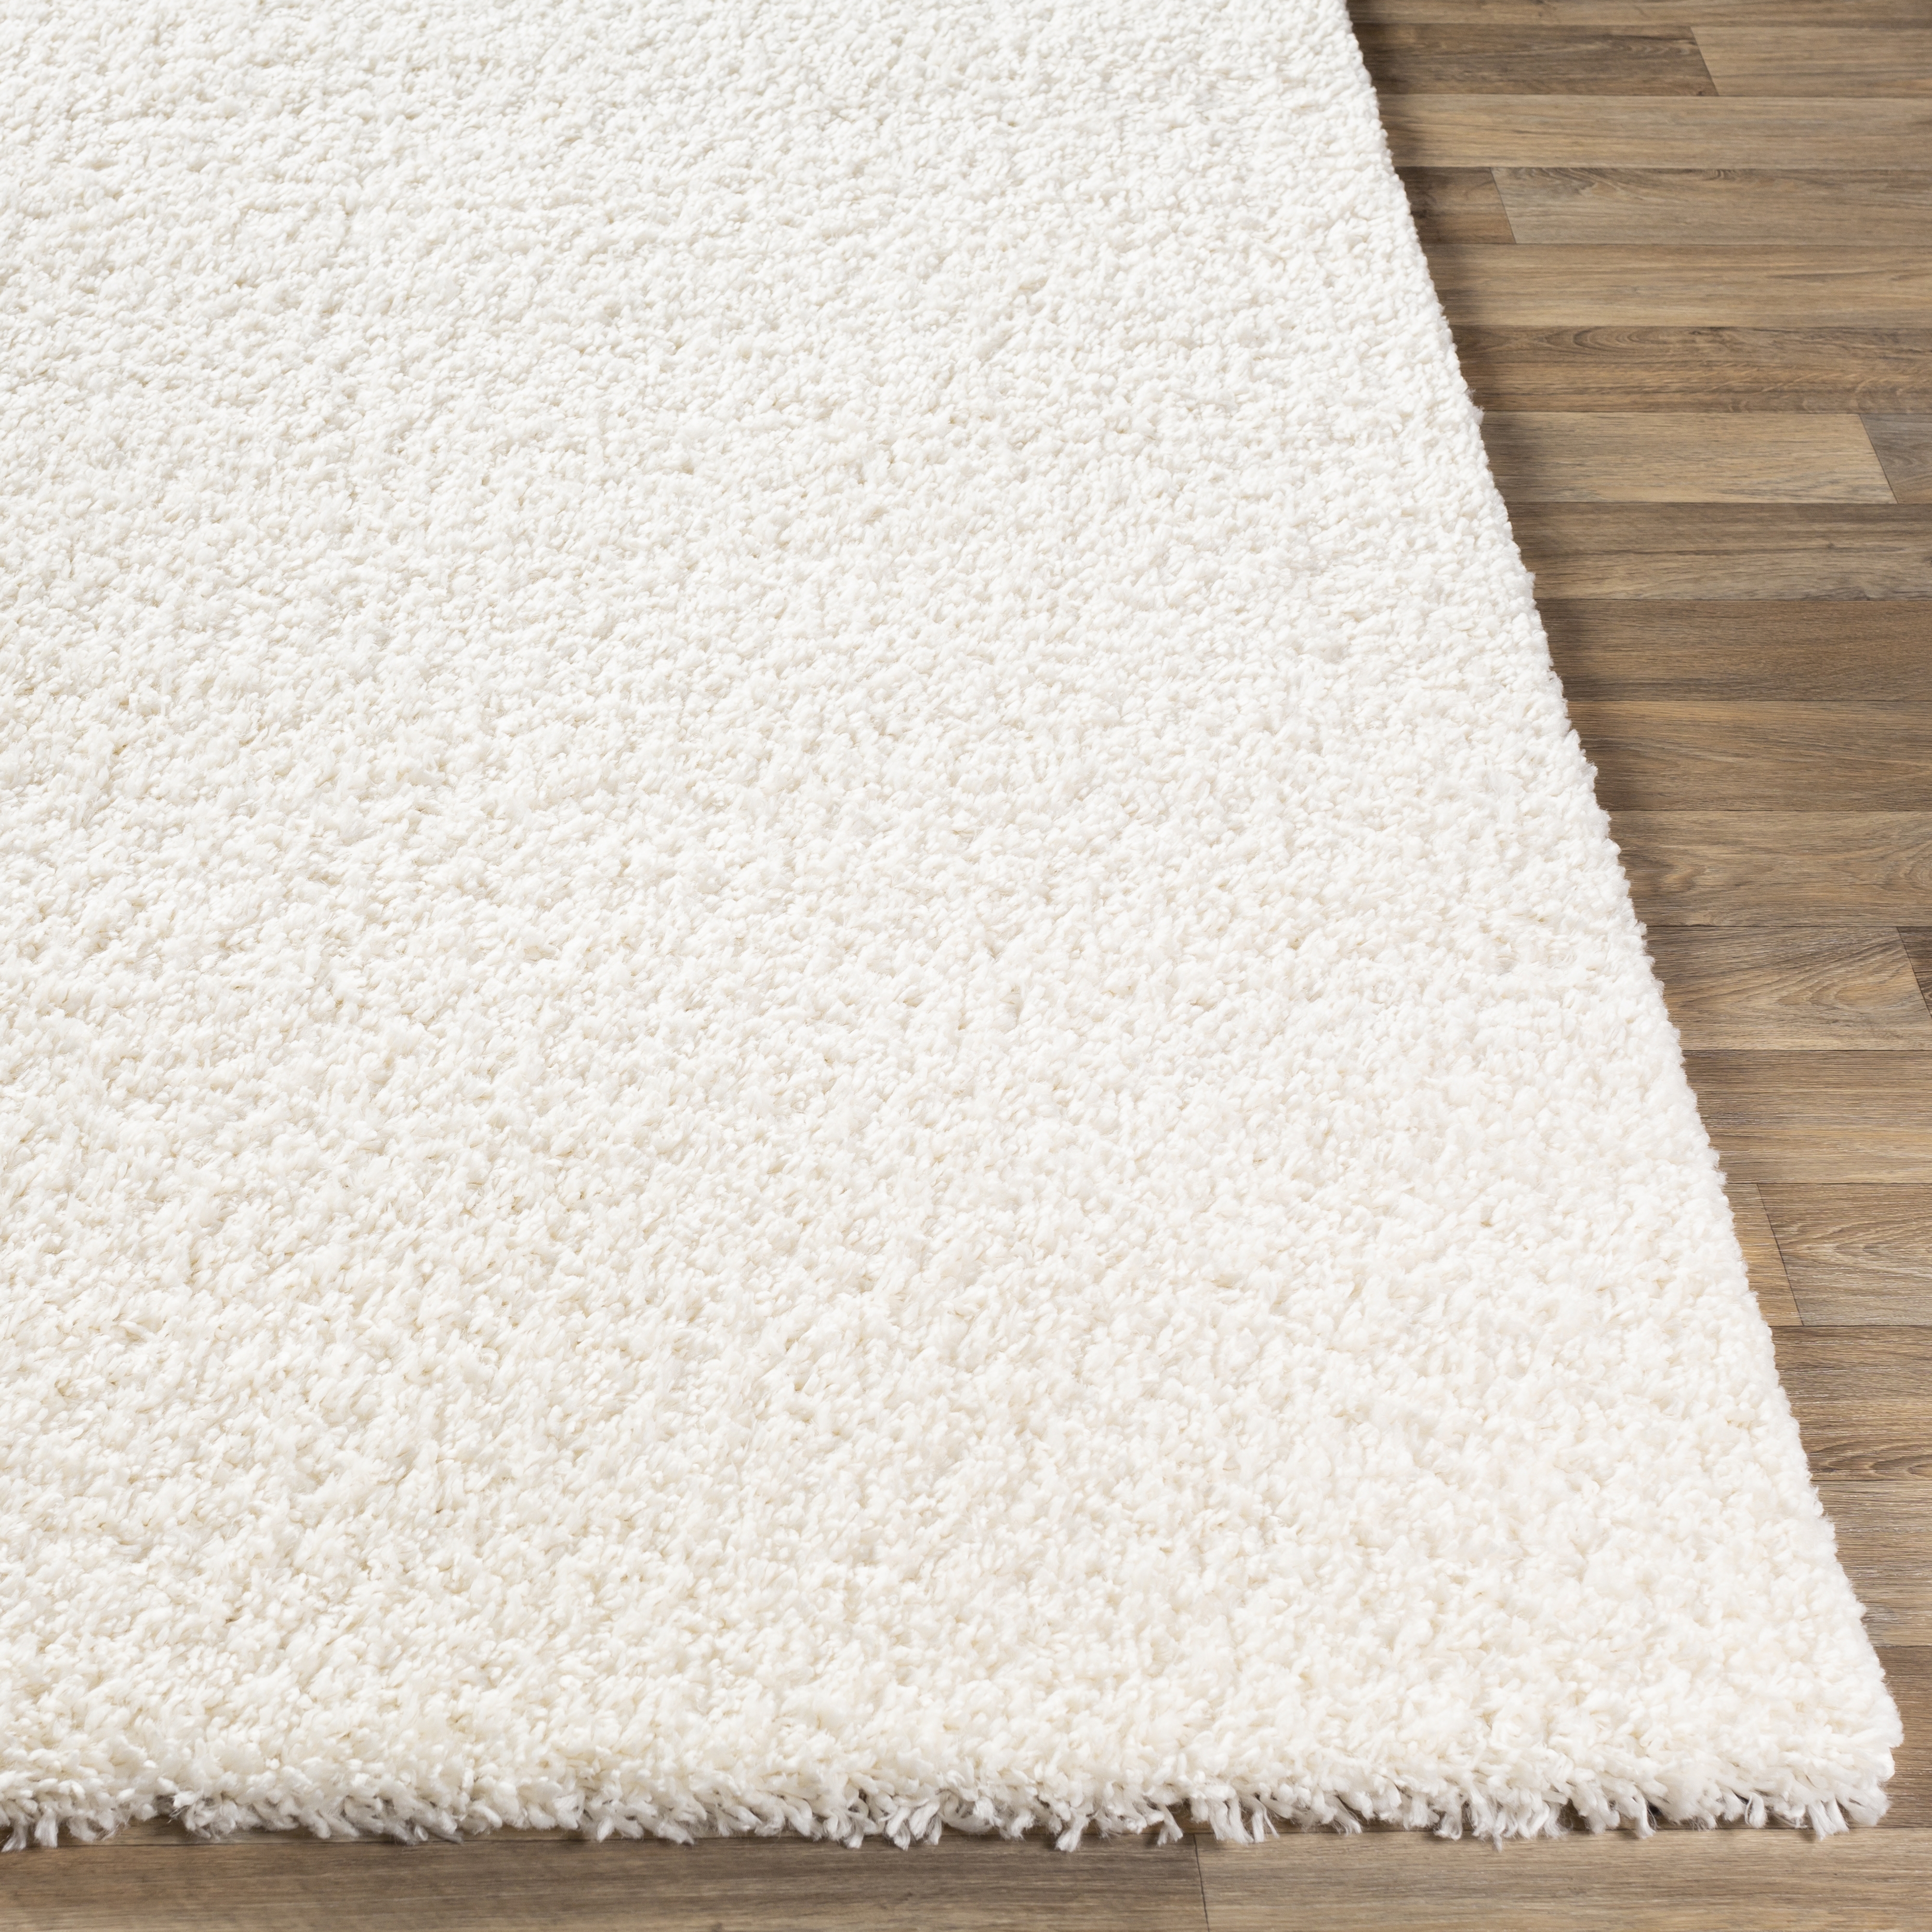 Deluxe Shag Rug, 7'10" x 10'2" - Image 2